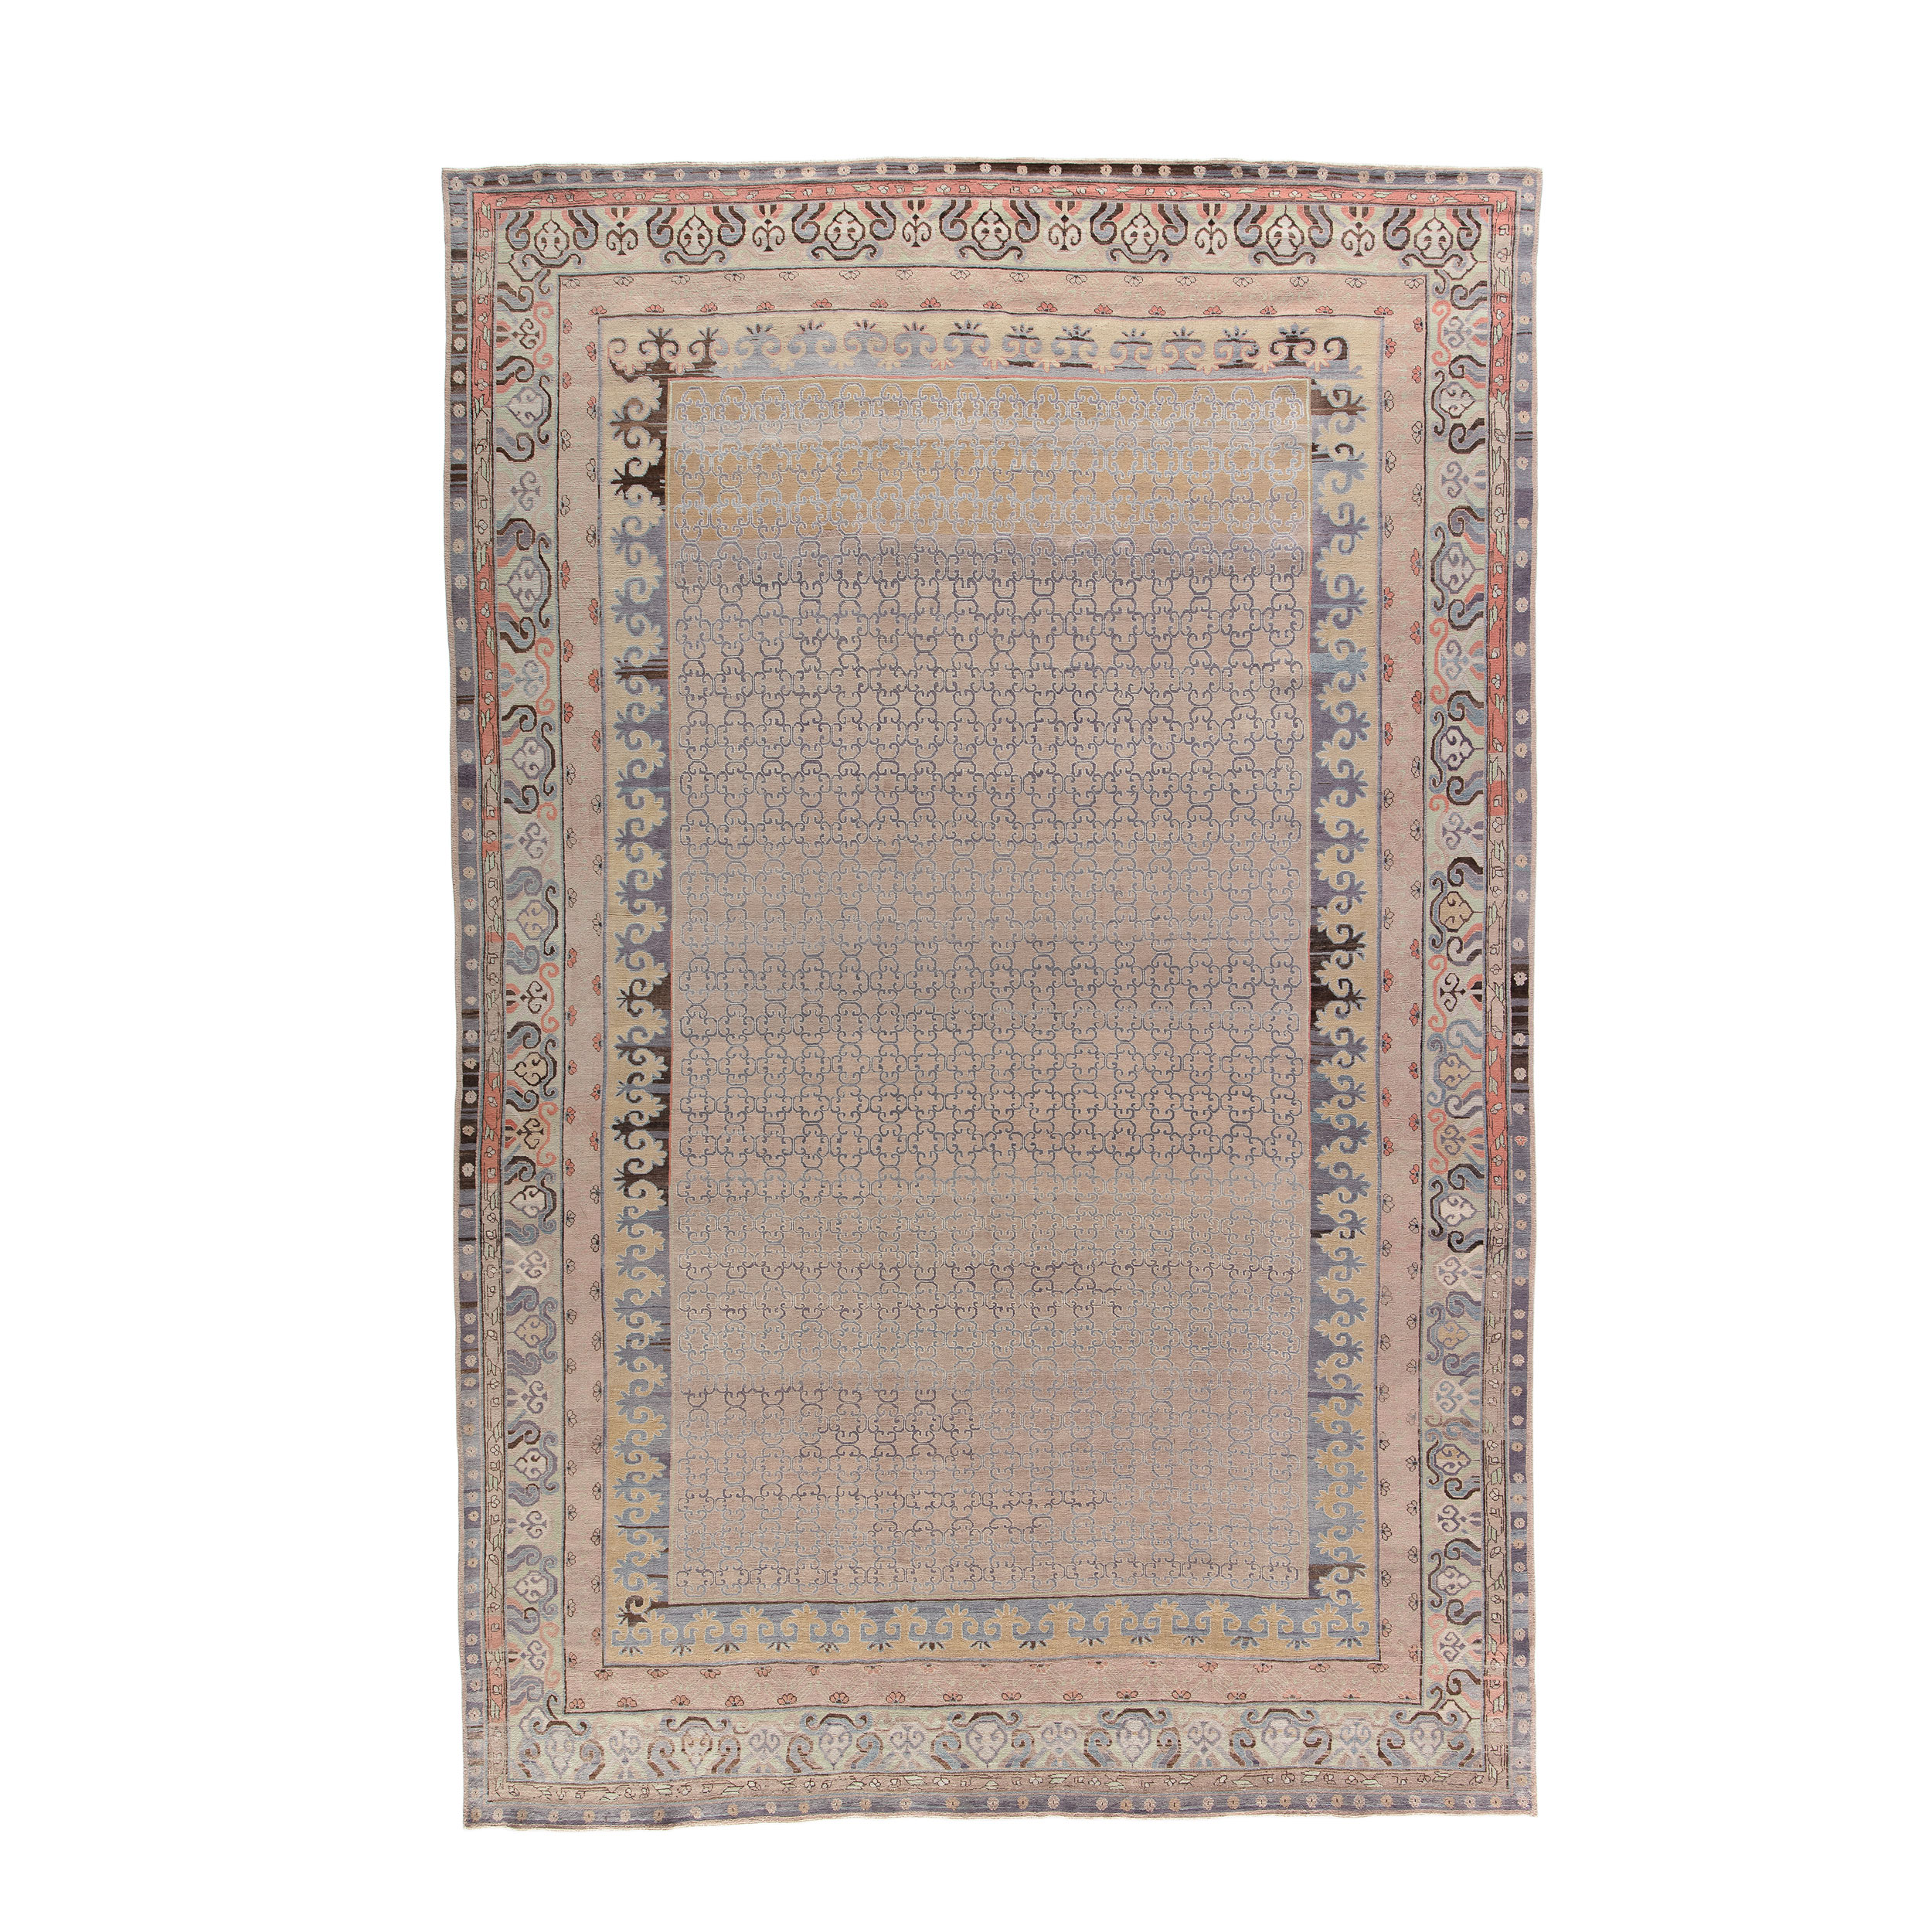  This Sevilla rug is crafted using hand-carded wool and natural dyes. 